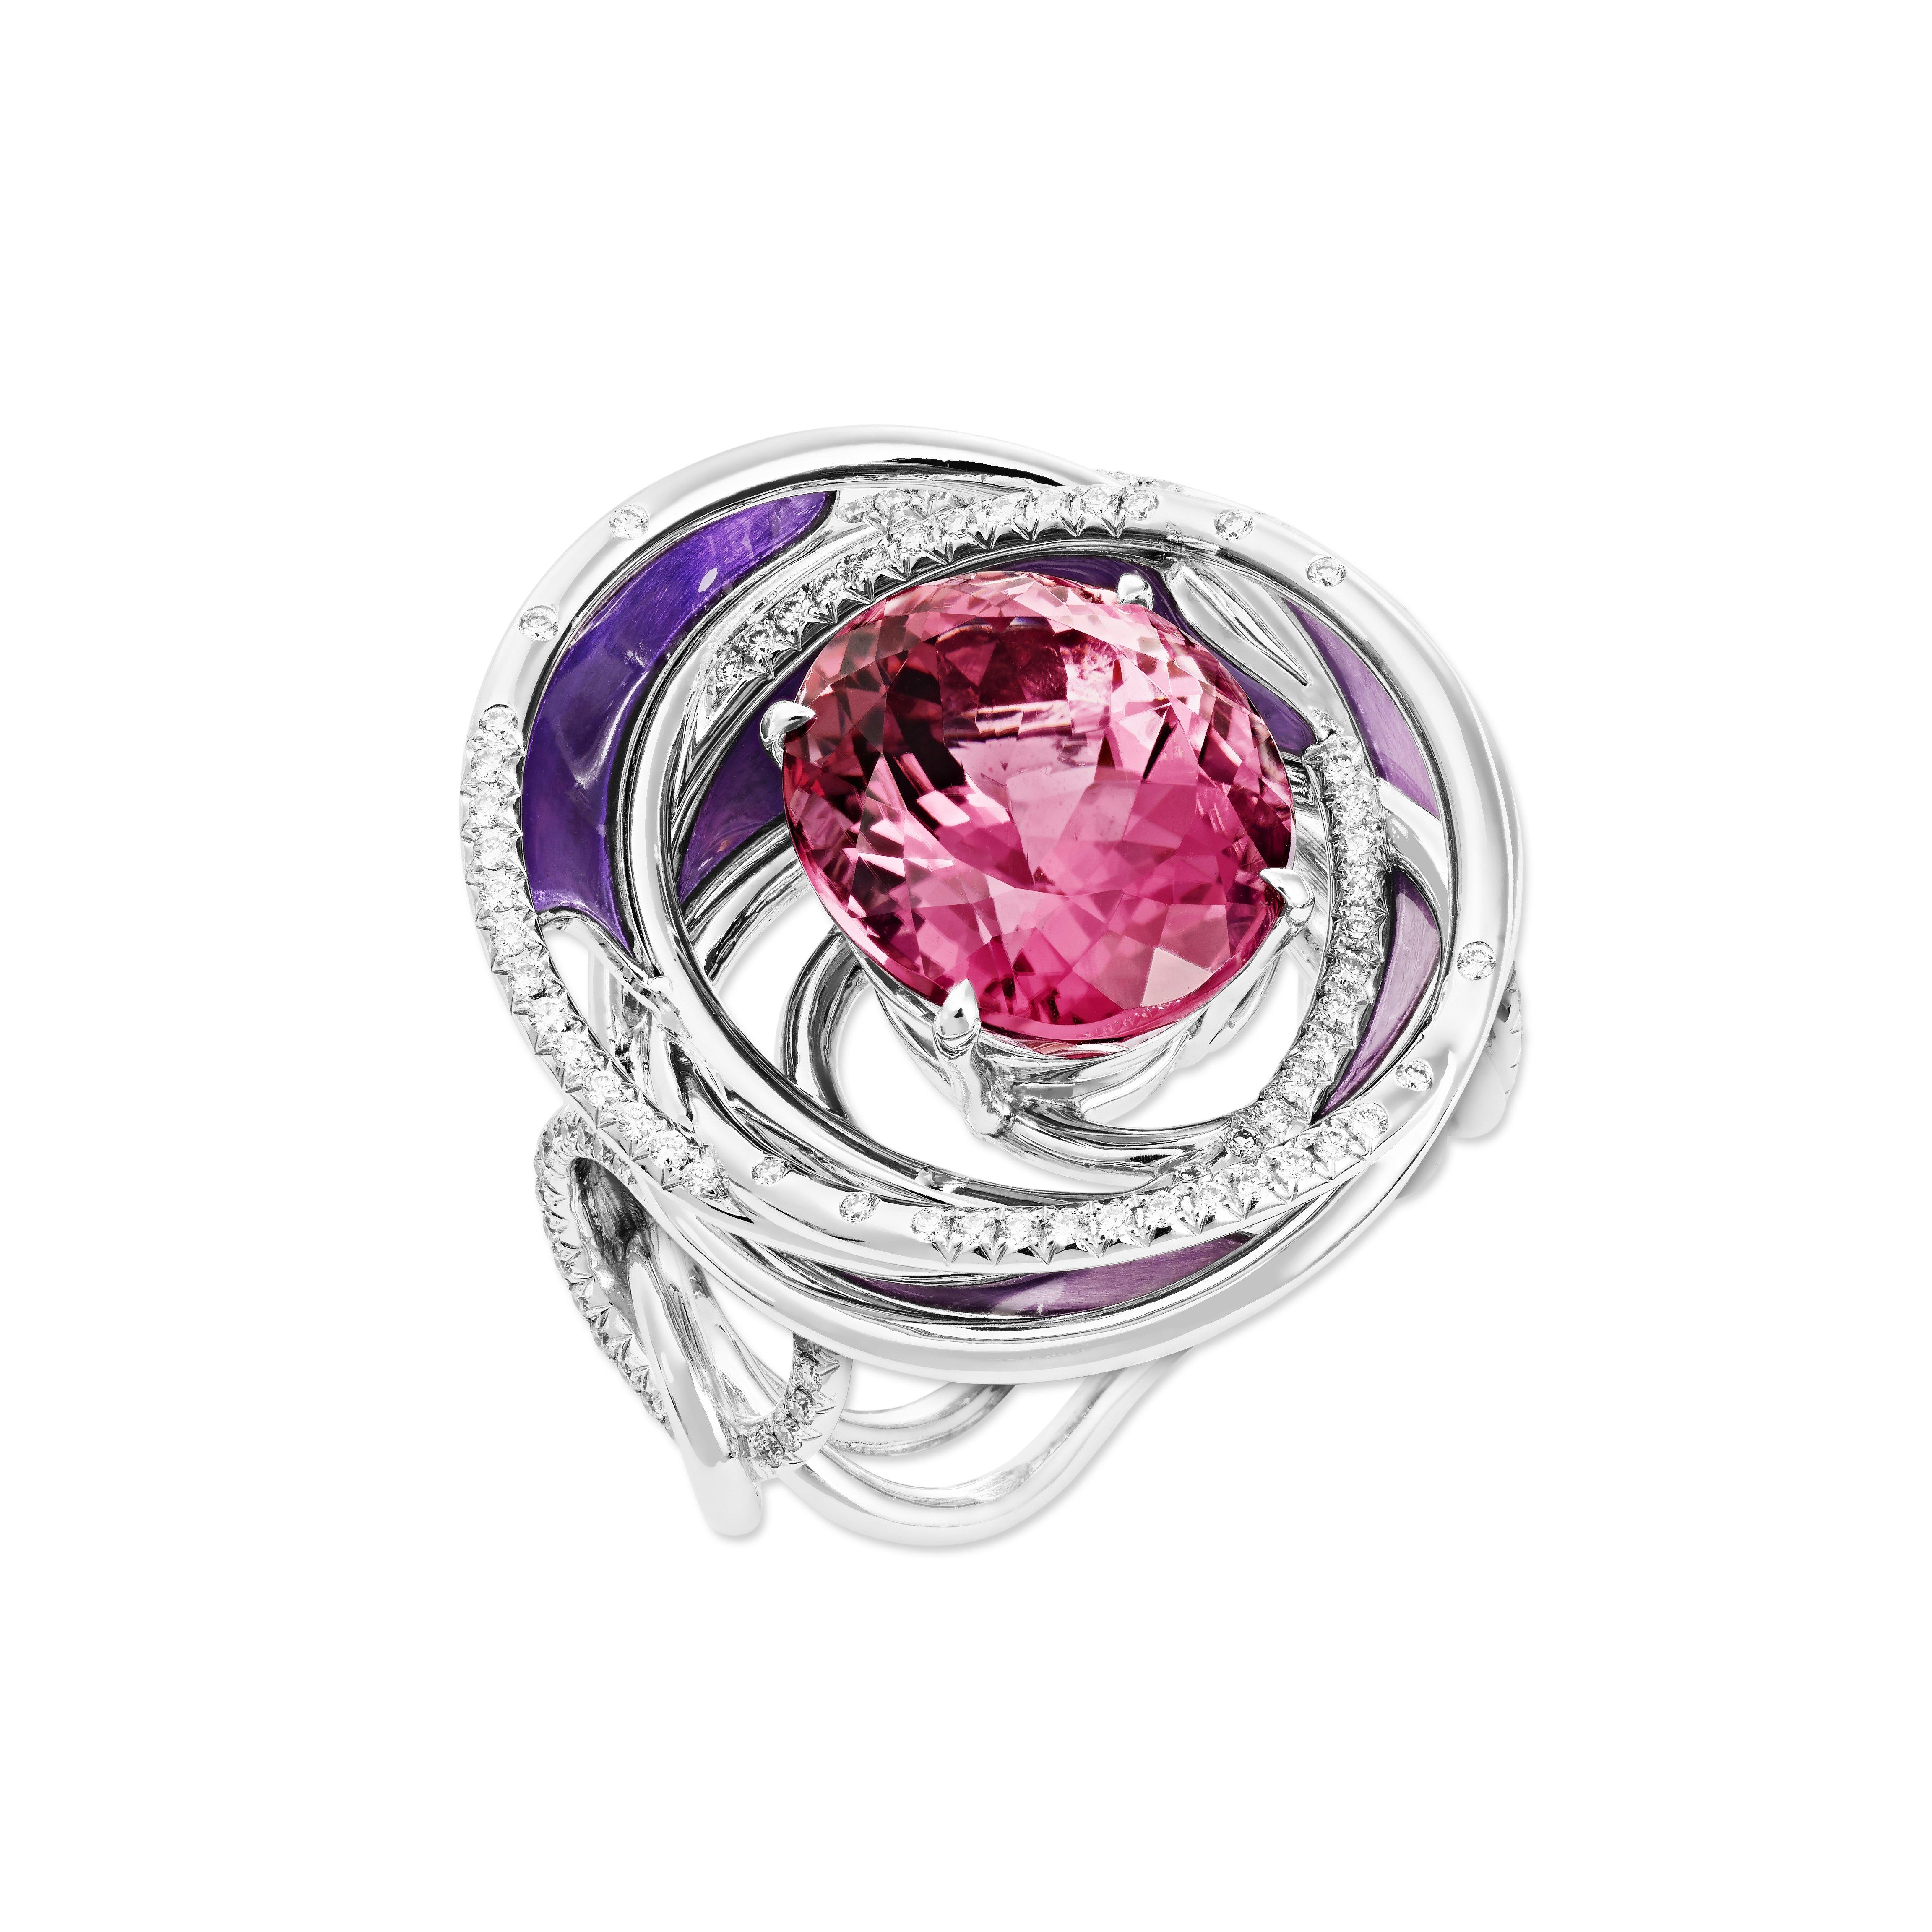 This wonderful white gold ring is composed of a pink tourmaline of almost 9 cts and a pavage of white diamonds. Lorenz Bäumer took over the design of a modern rose, with this pink tourmaline at its heart. This ring is very easy to wear and will